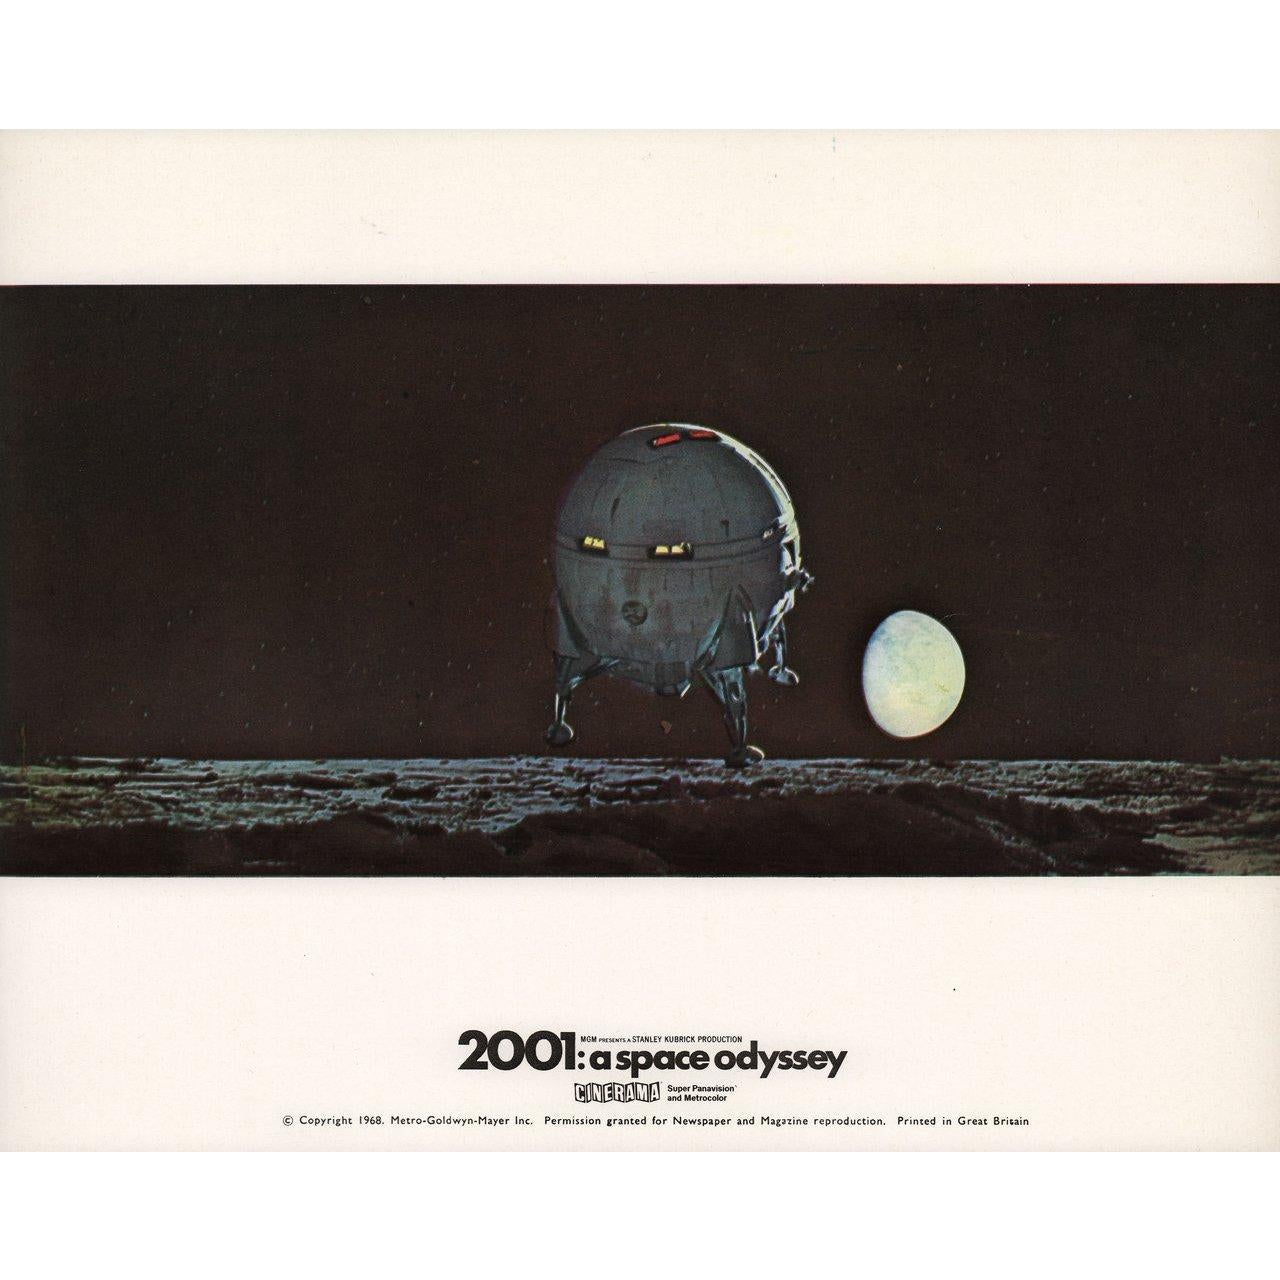 Original 1968 British color photo for the film 2001: A Space Odyssey directed by Stanley Kubrick with Keir Dullea / Gary Lockwood / William Sylvester / Daniel Richter. Very Good-Fine condition, pinholes & water stain in top border. Please note: the